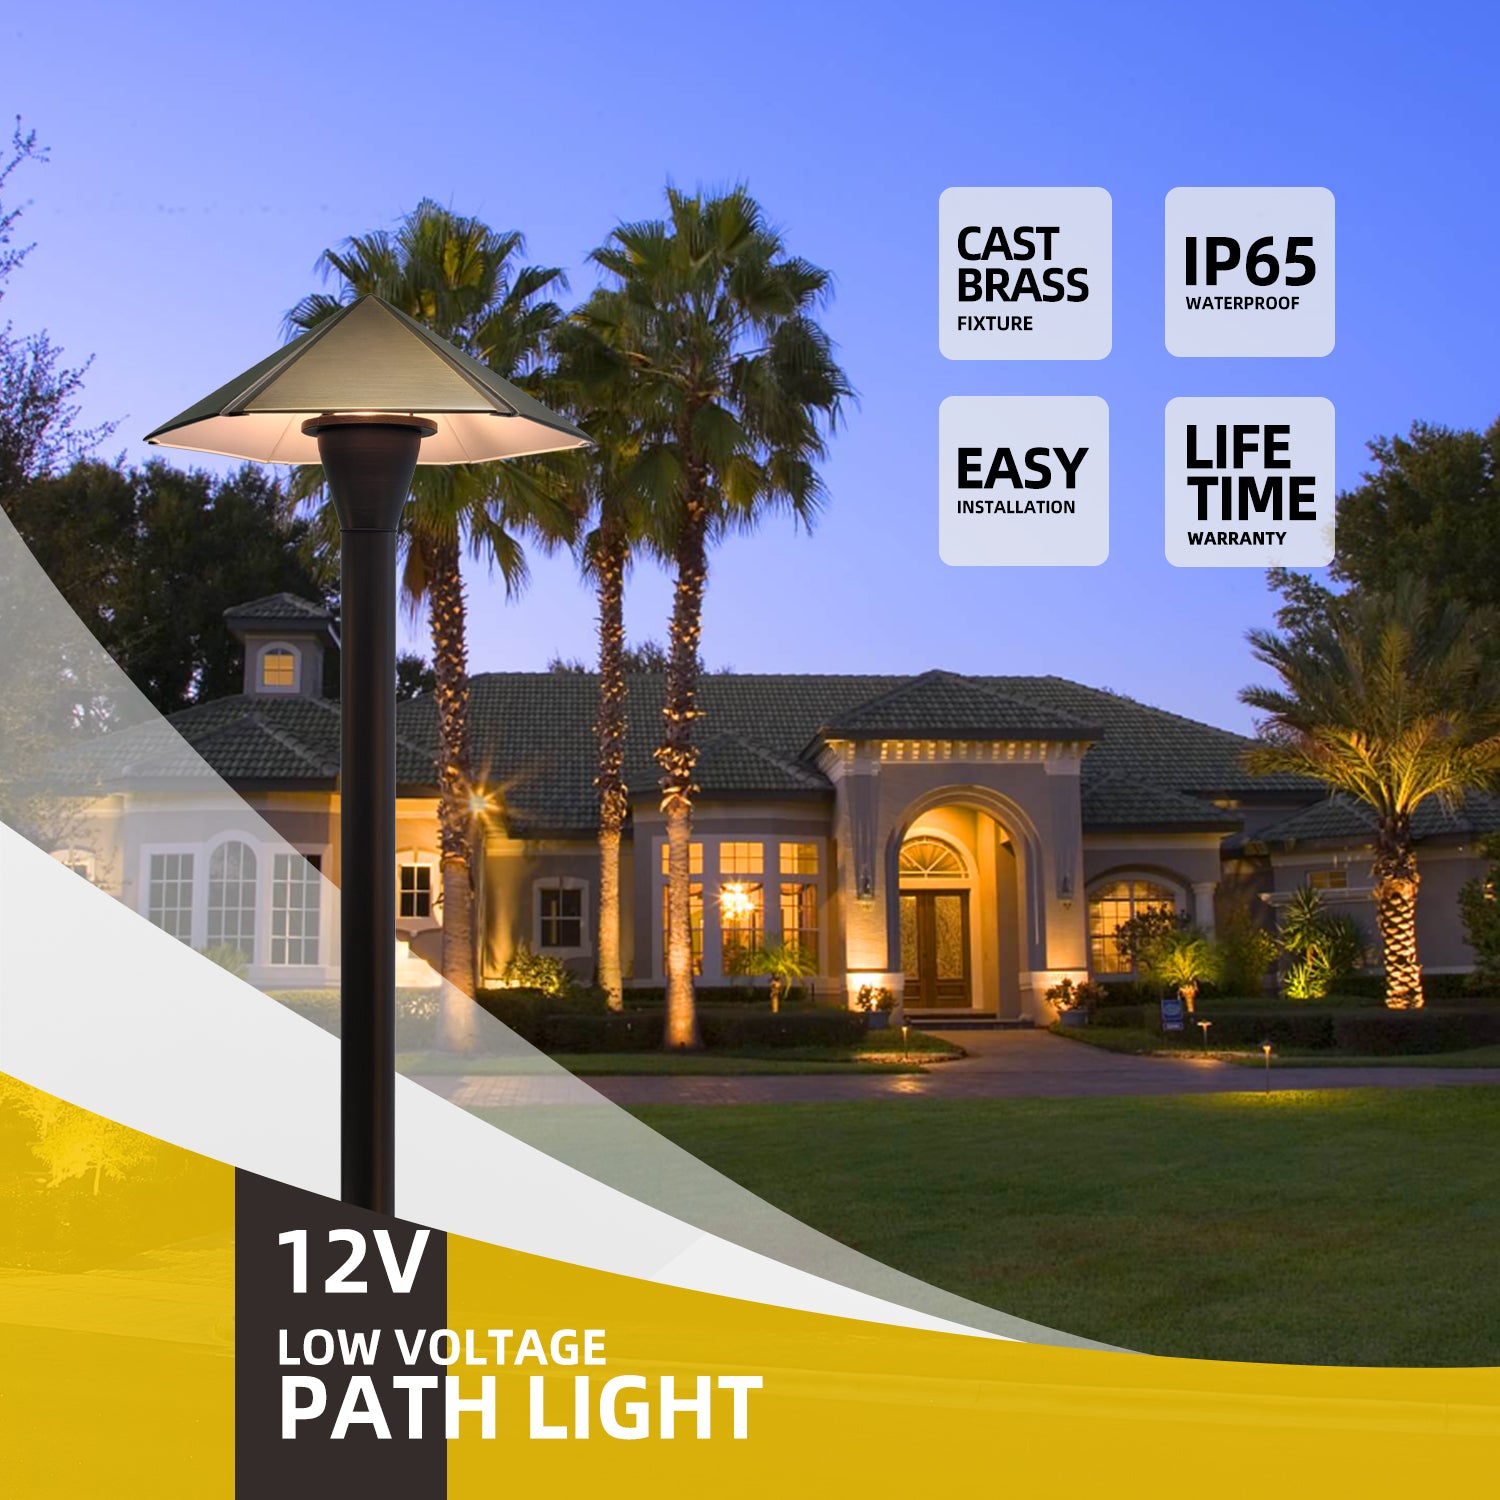 12V low voltage pathway light made of cast brass in a garden setting with a house illuminated in the background, showcasing features like cast brass fixture, IP65 waterproof, easy installation, and lifetime warranty.